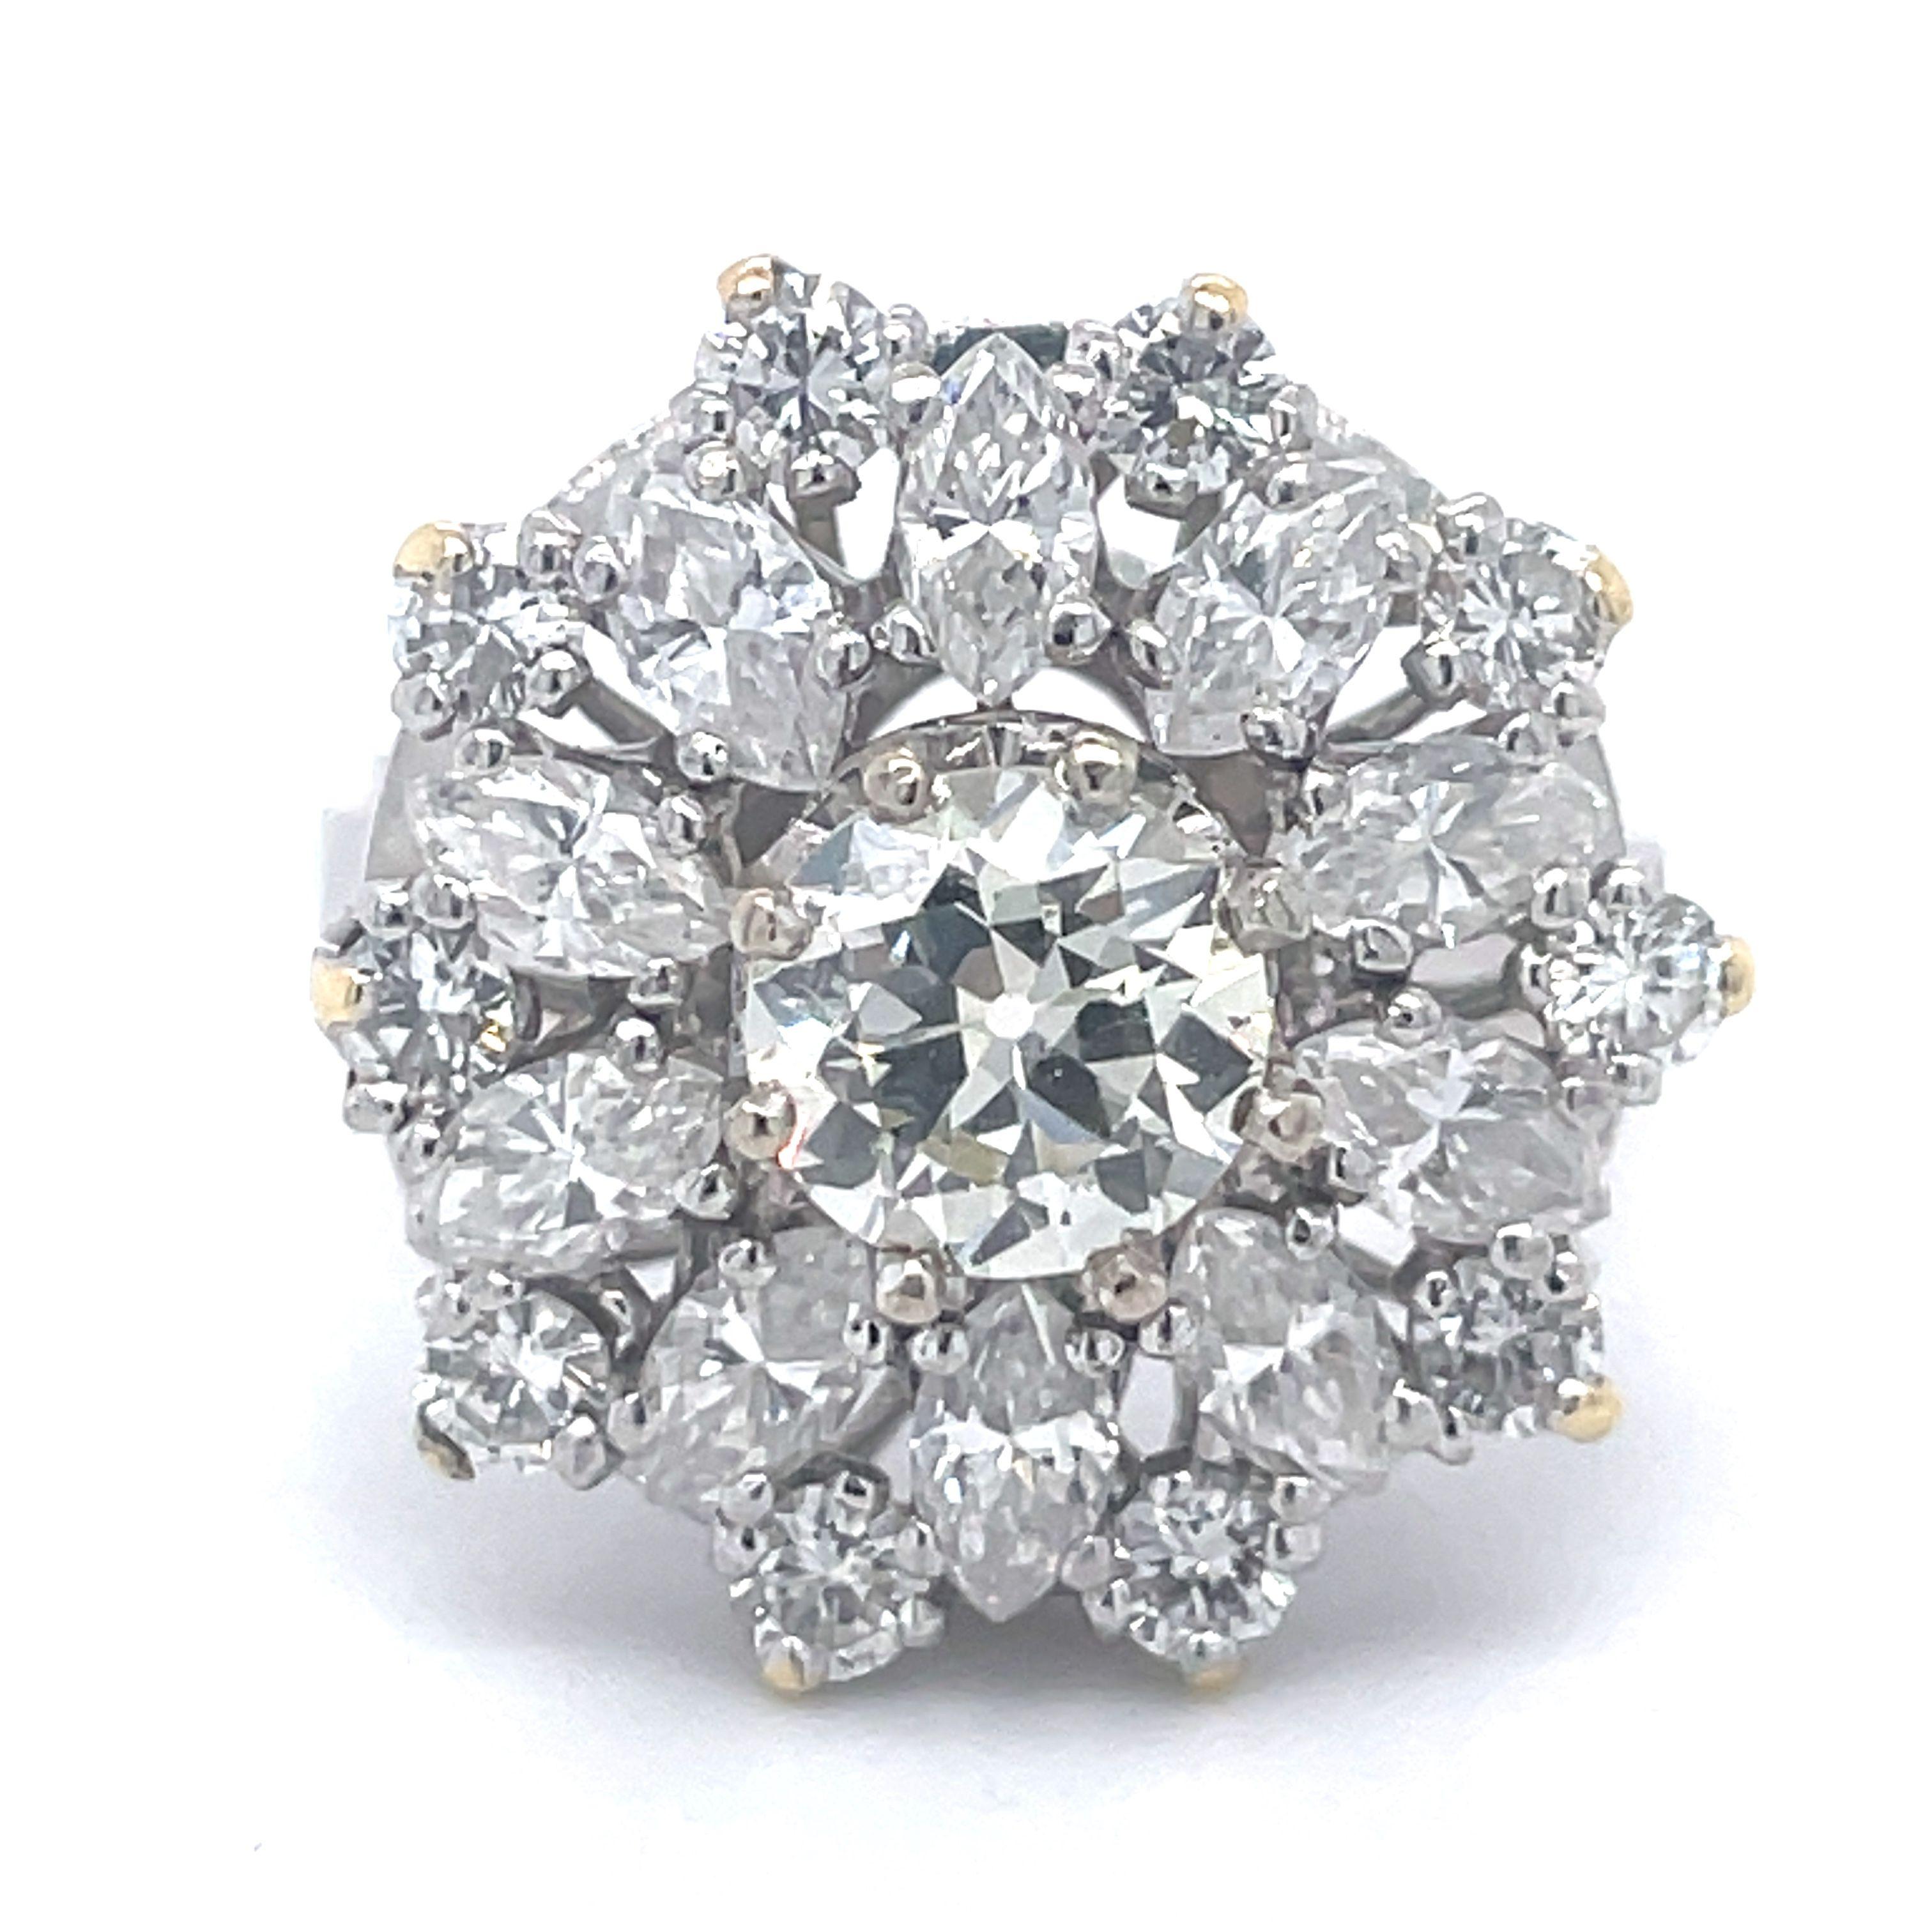 Jewelry Material: Platinum (the gold has been tested by a professional)
Total Carat Weight: 2.7ct (Approx.)
Total Metal Weight: 10.56 g
Size: 6US \ 16.51 mm (inner diameter)

ONE (1) ROUND BRILLIANT - NATURAL DIAMOND
Measurements : 6.51 - 6.40 x